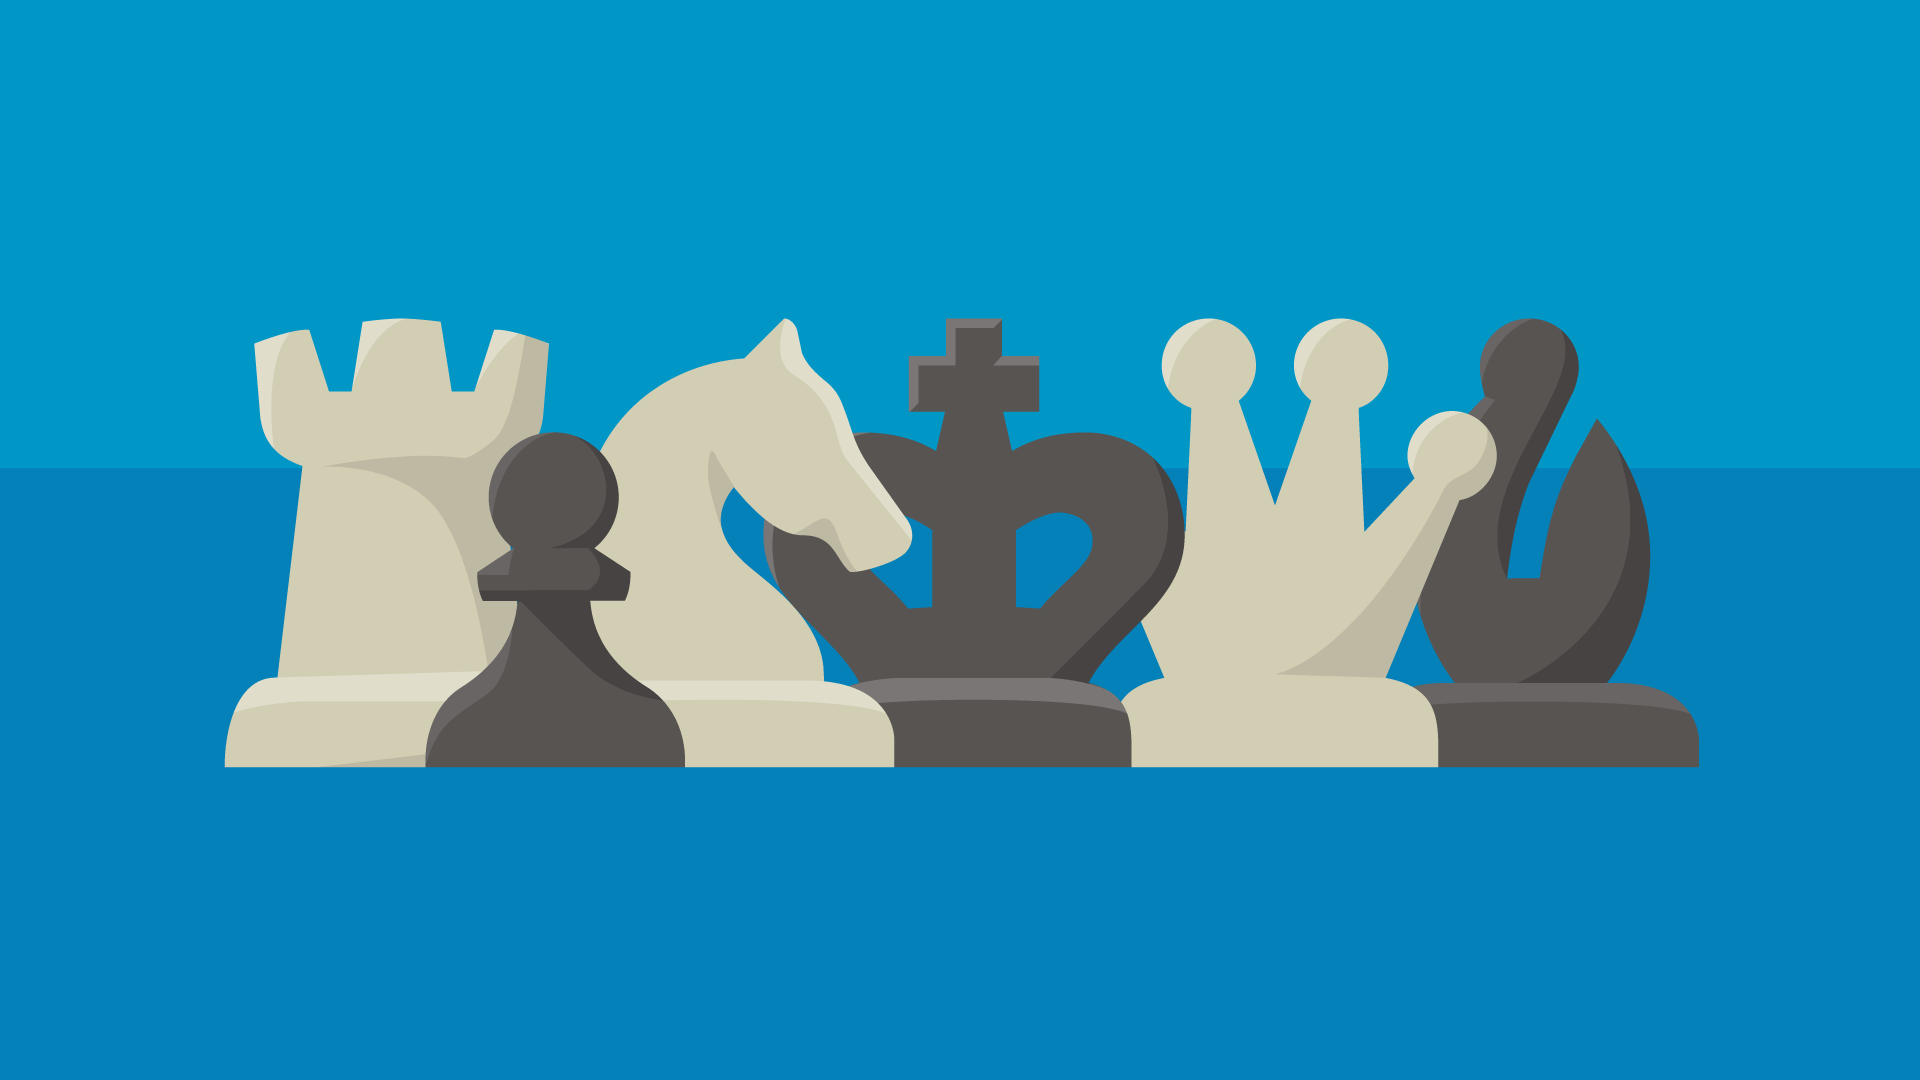 Illustration of chess pieces.